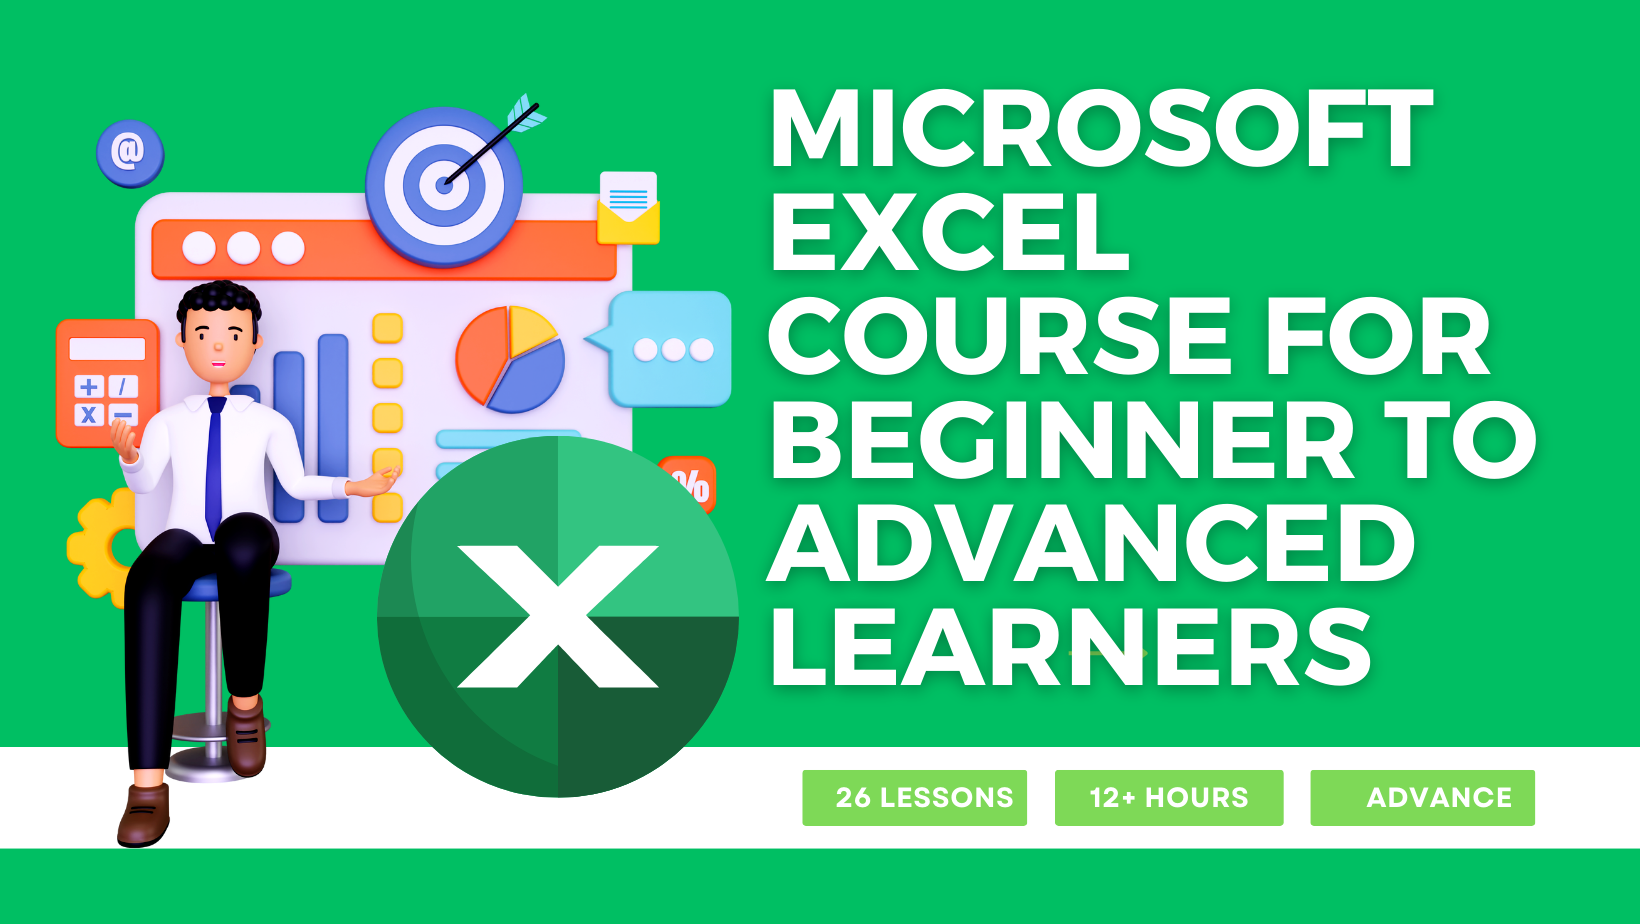 Microsoft excel course for beginner to advanced learners